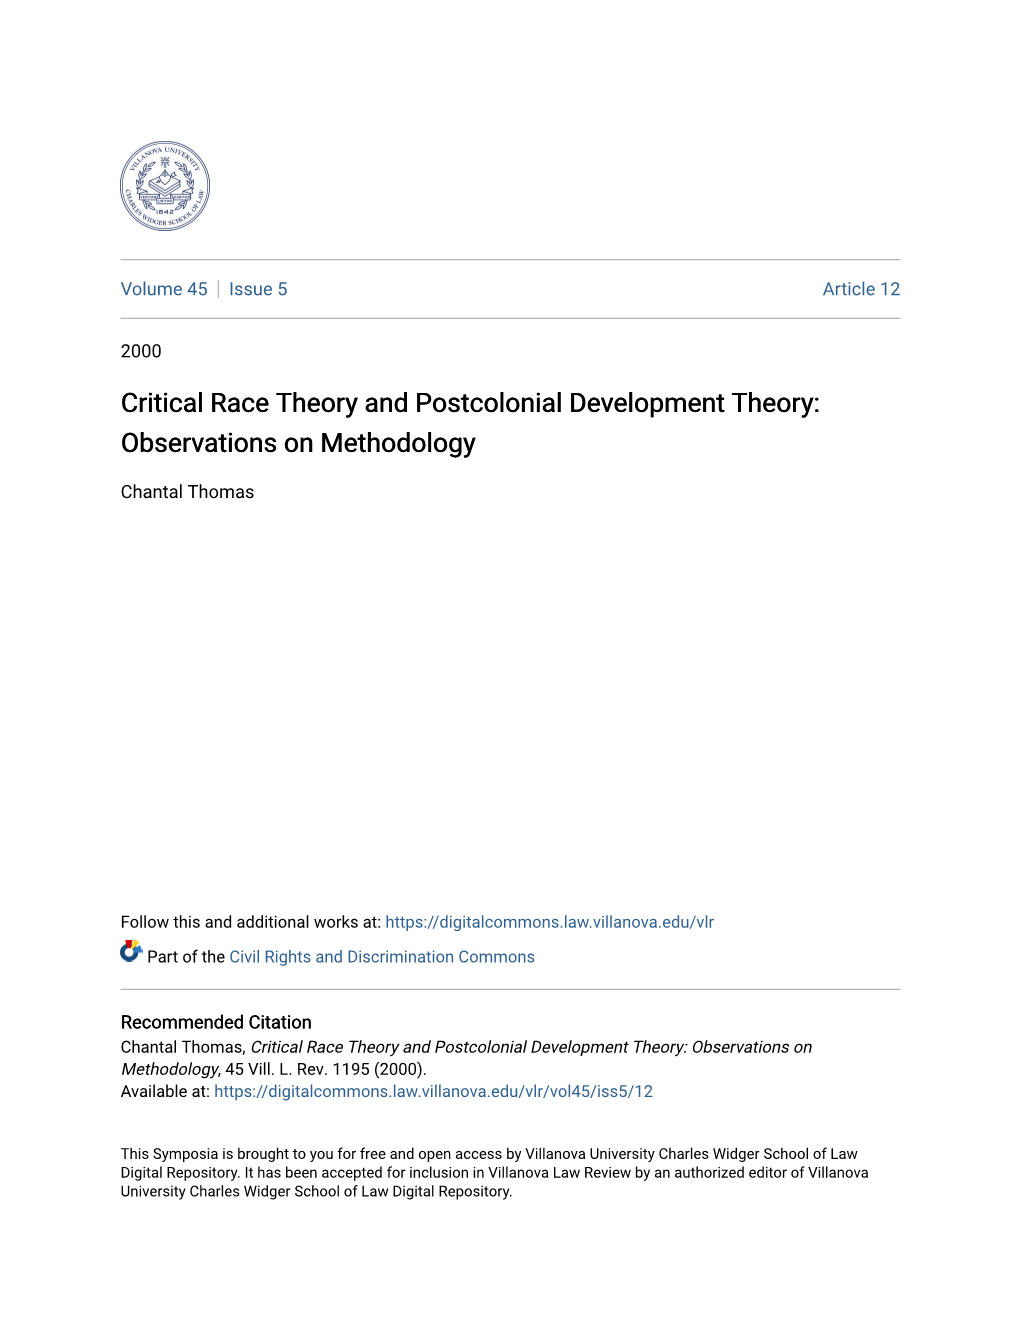 Critical Race Theory and Postcolonial Development Theory: Observations on Methodology